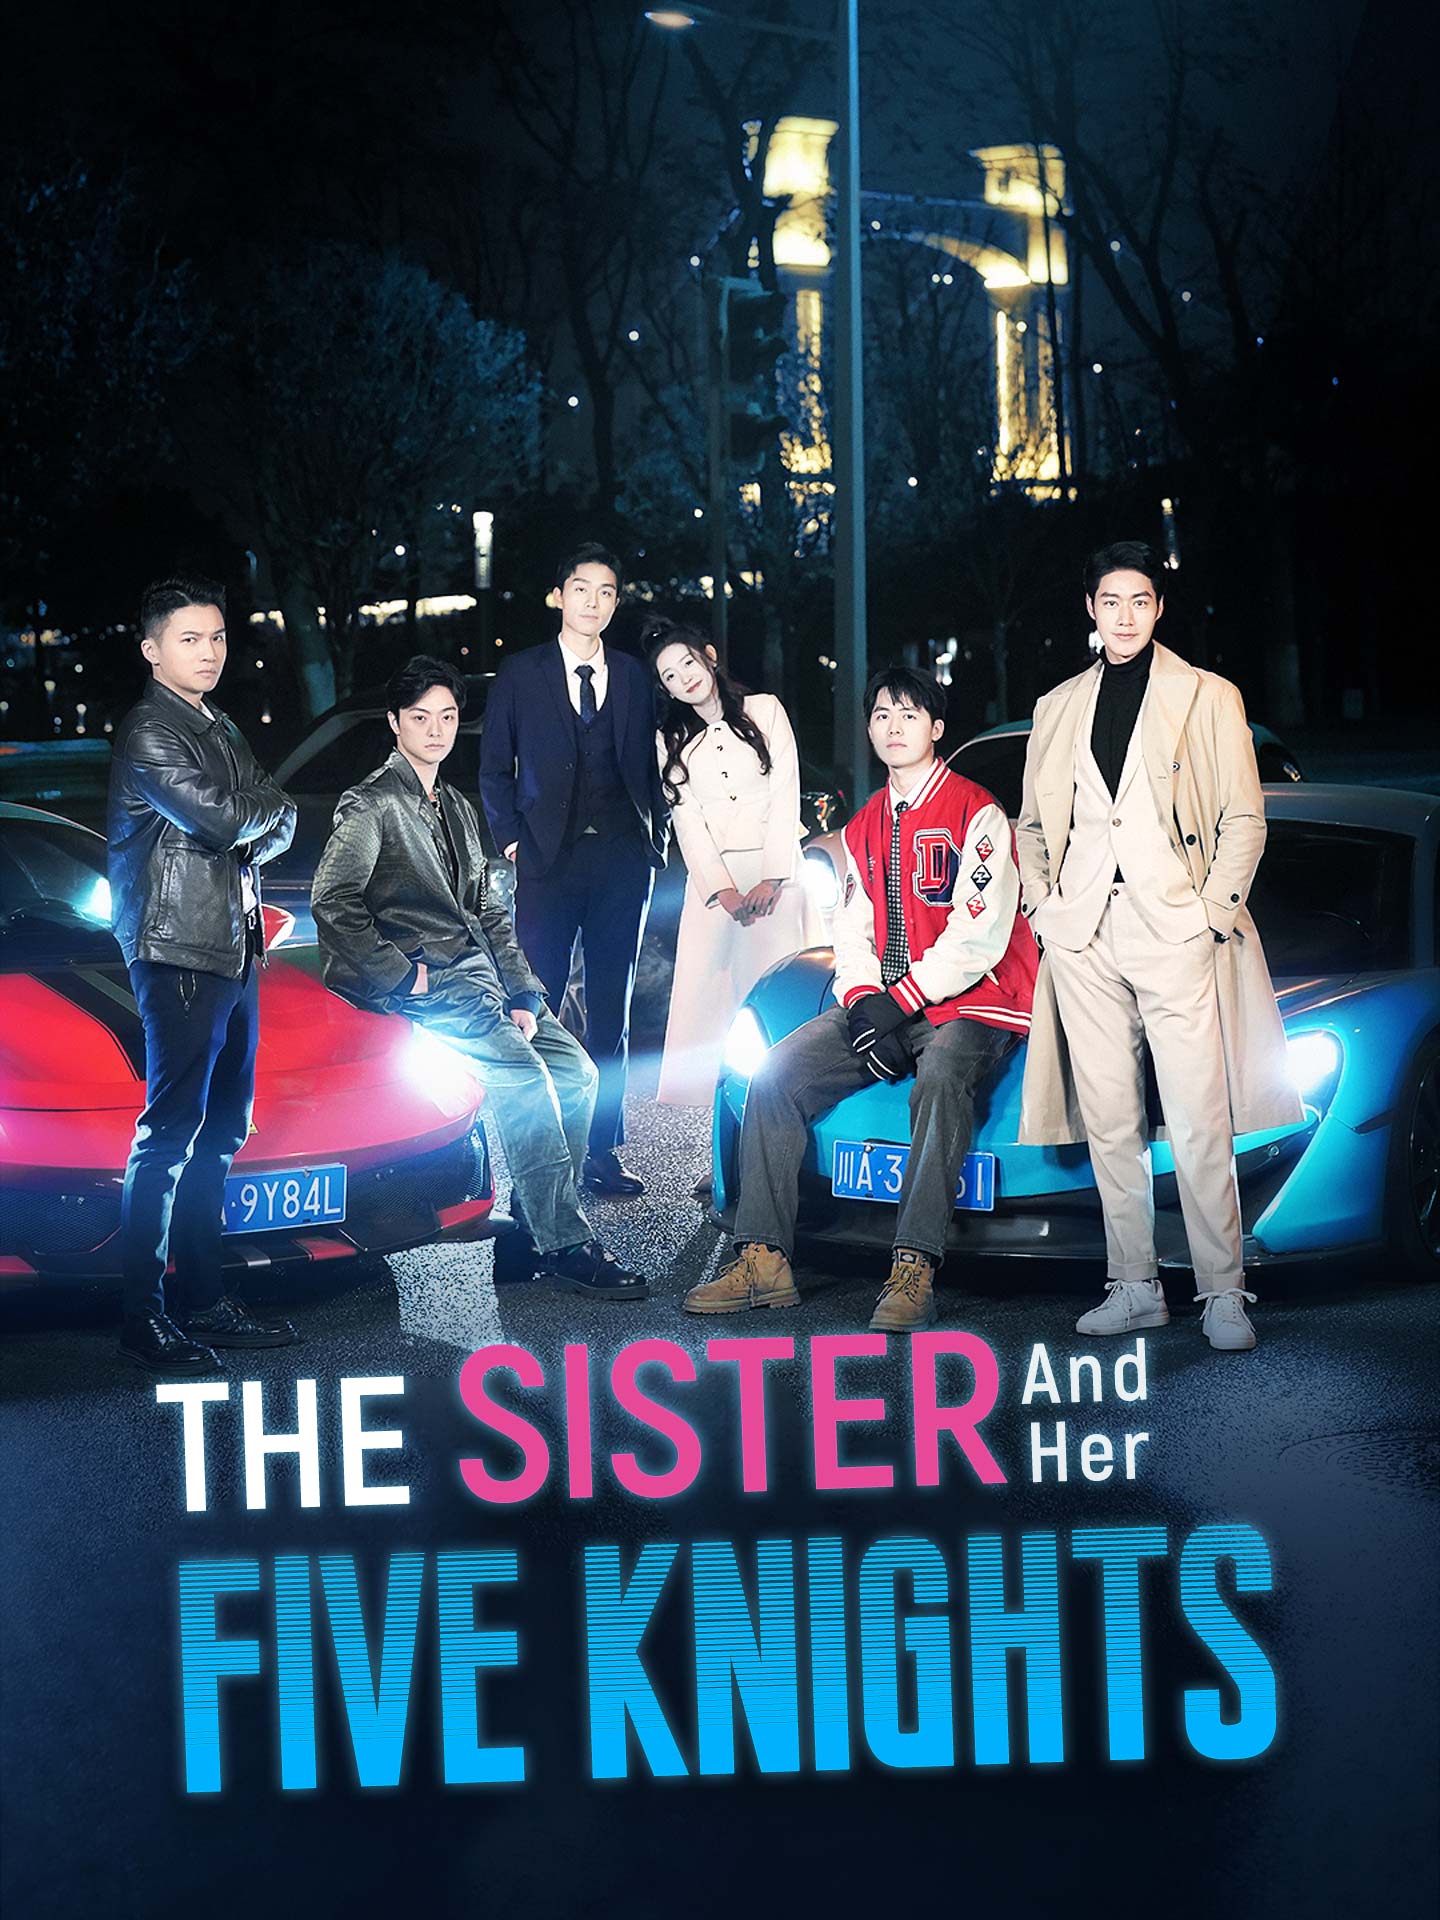 The Sister And Her Five Knights